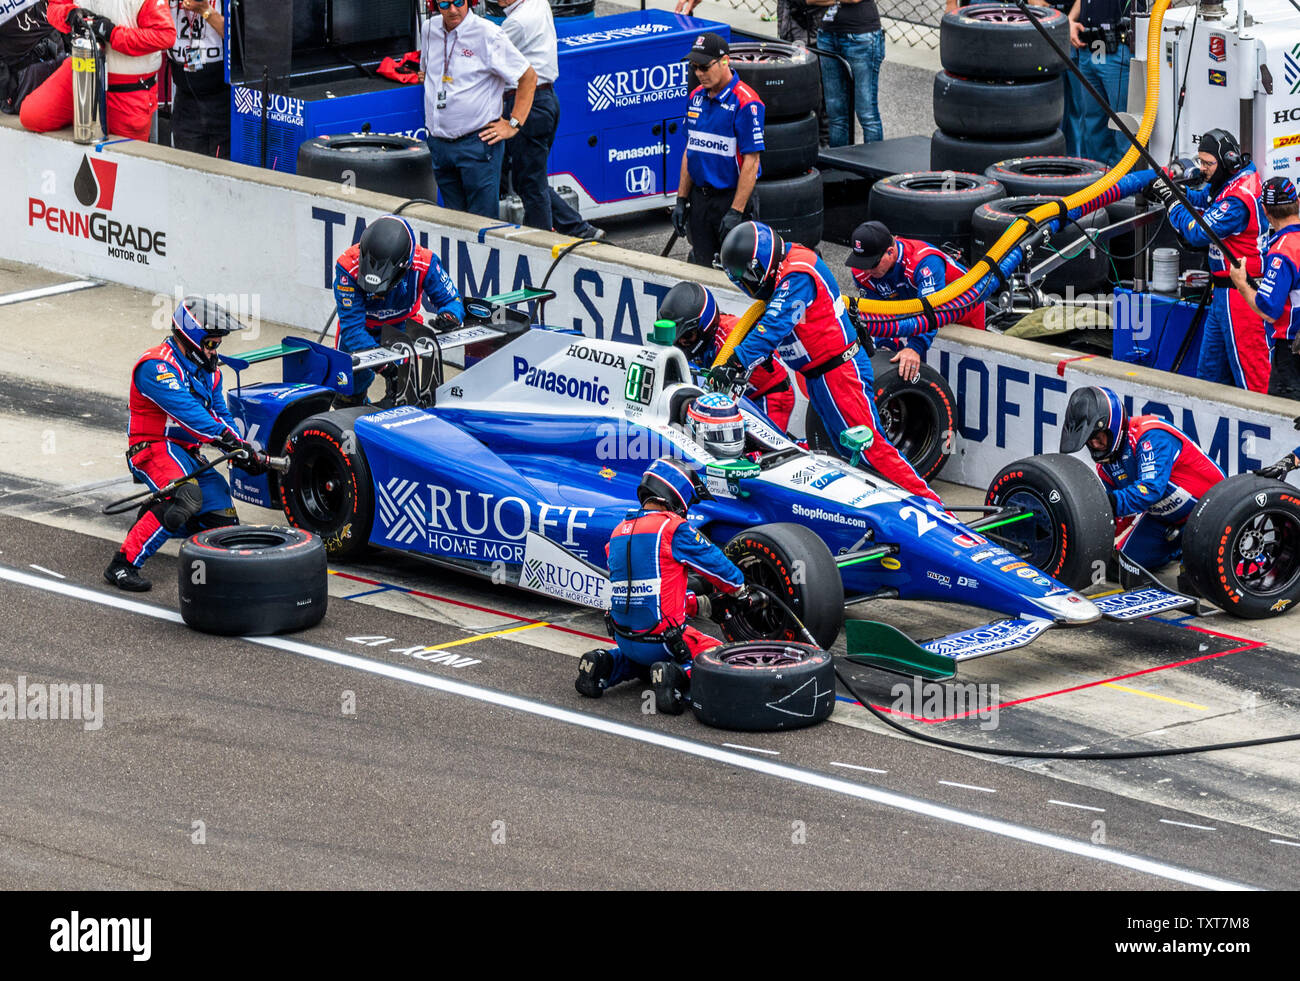 Eventual Winner Takuma Sato Pits Early In The 17 Indianapolis 500 At The Indianapolis Motor Speedway On May 28 17 In Indianapolis Indiana Photo By Edwin Locke Upi Stock Photo Alamy